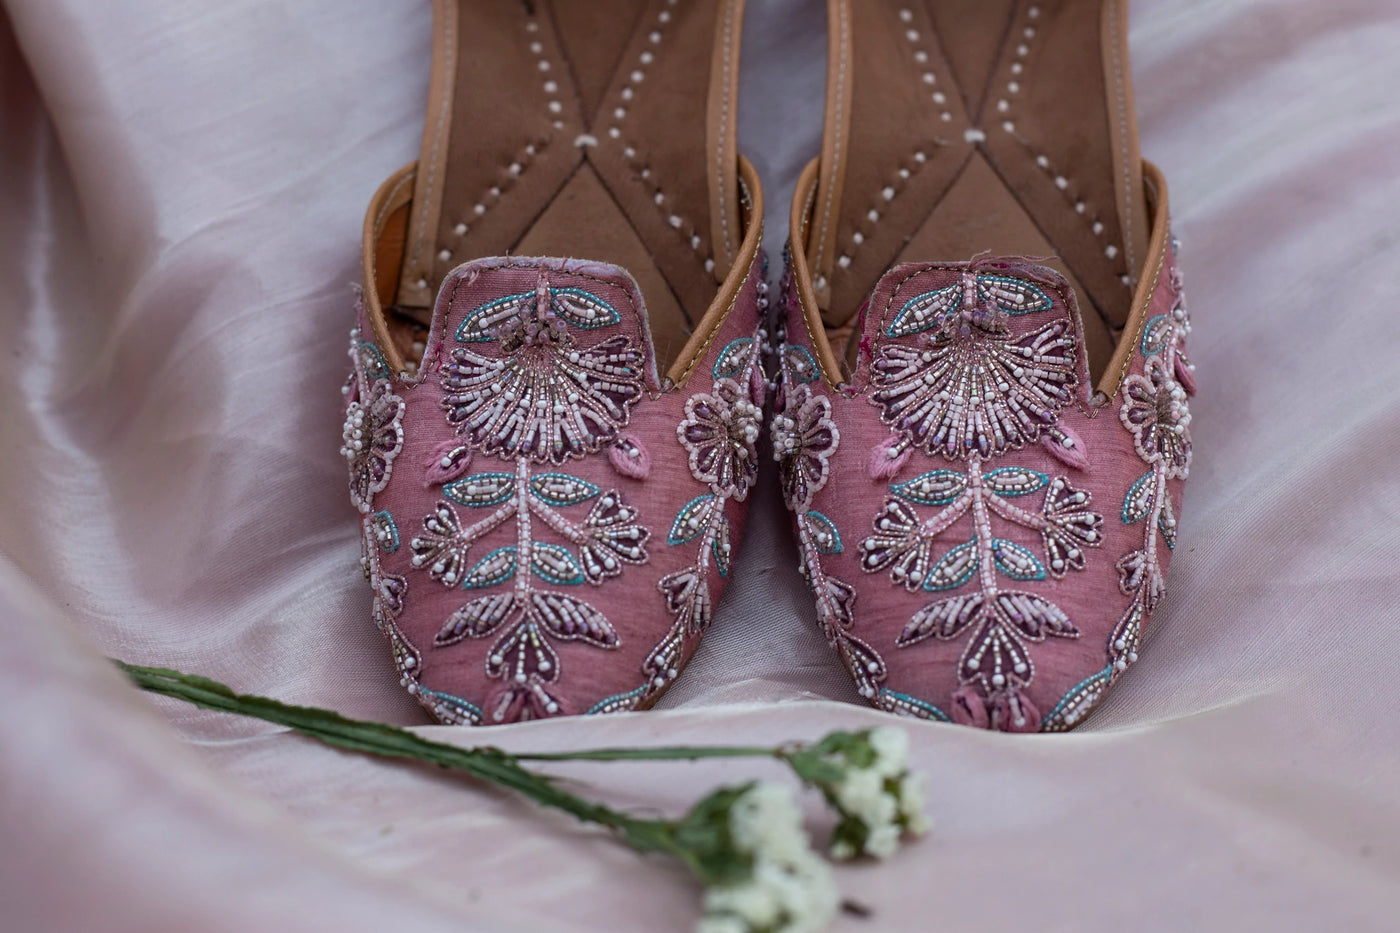 Baby Blush Embroidered Juttis Indian Clothing in Denver, CO, Aurora, CO, Boulder, CO, Fort Collins, CO, Colorado Springs, CO, Parker, CO, Highlands Ranch, CO, Cherry Creek, CO, Centennial, CO, and Longmont, CO. NATIONWIDE SHIPPING USA- India Fashion X